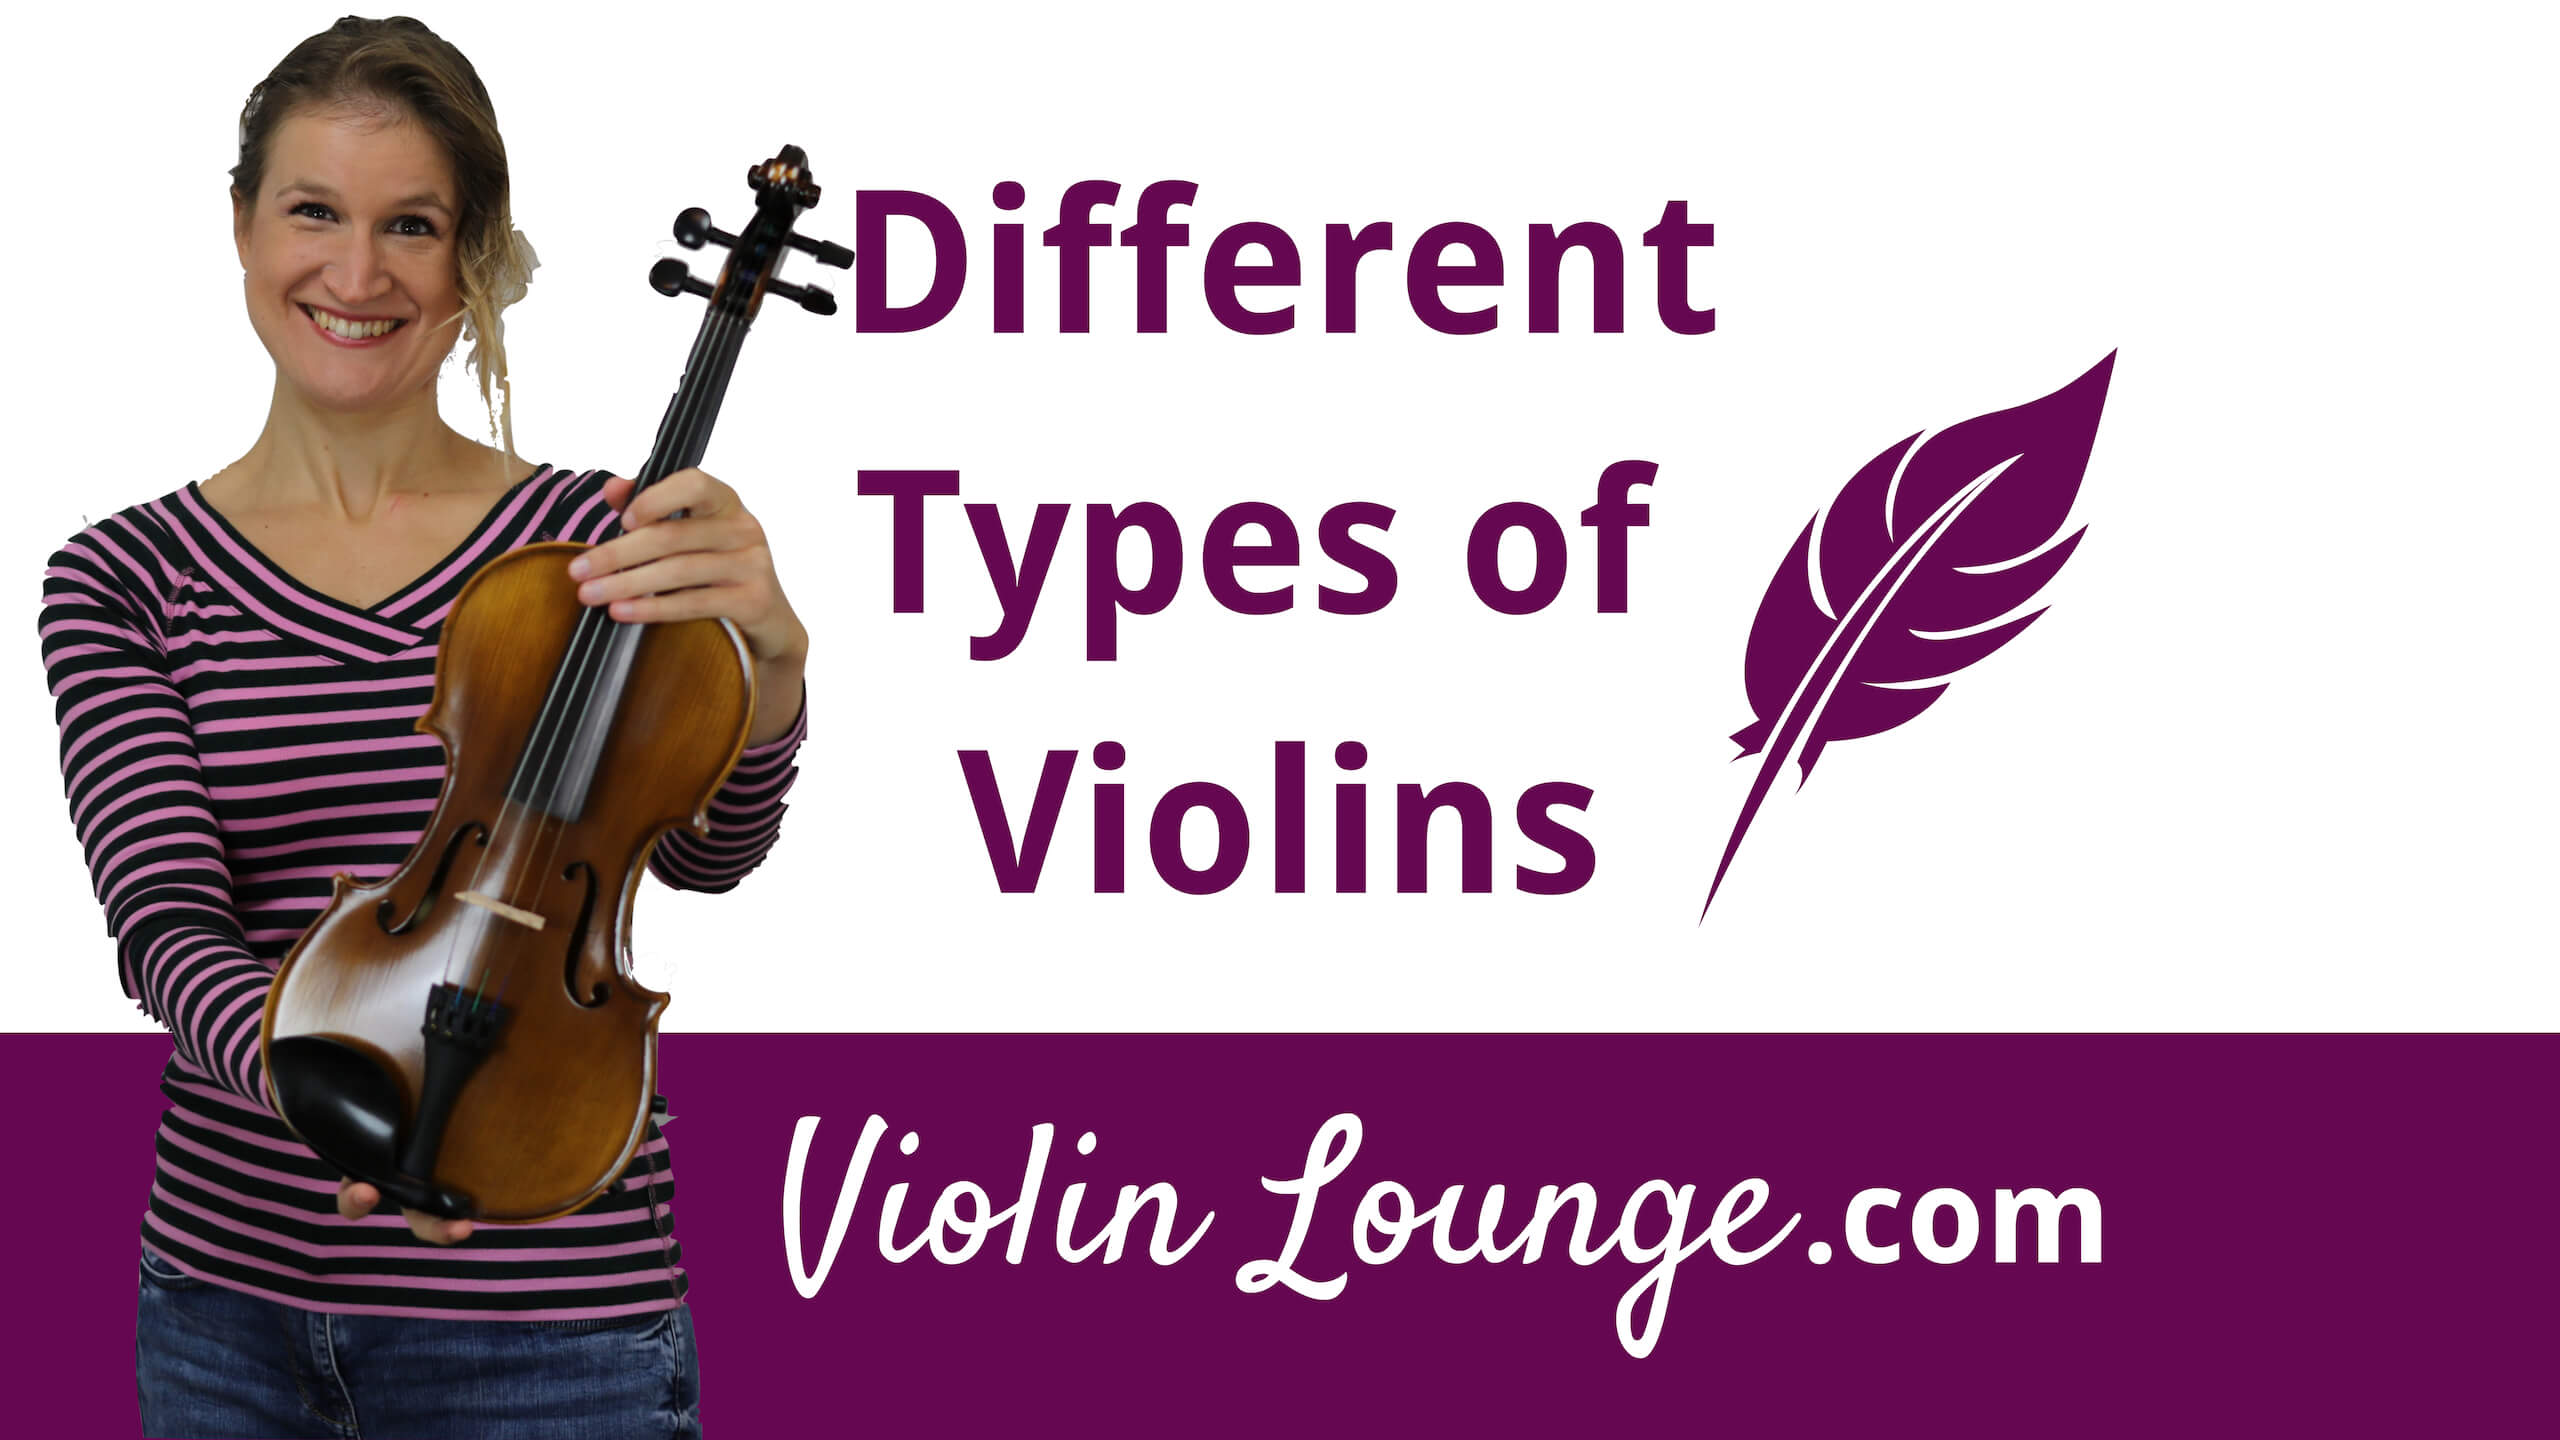 fiddle violin difference